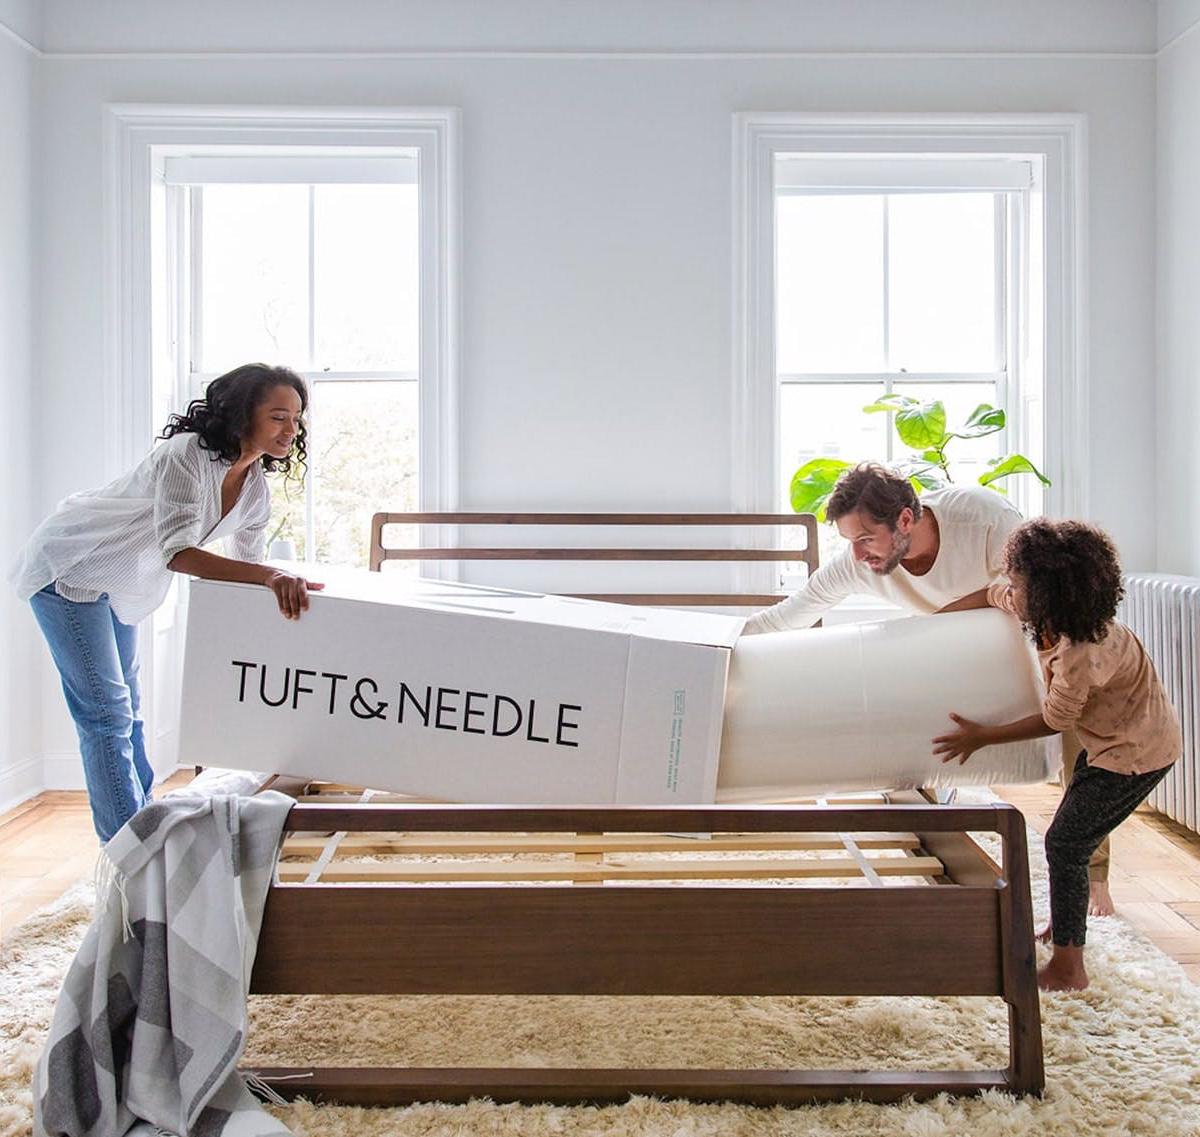 Tuft And Needle Mattress Size Chart, Tuft And Needle King Size Bed Dimensions